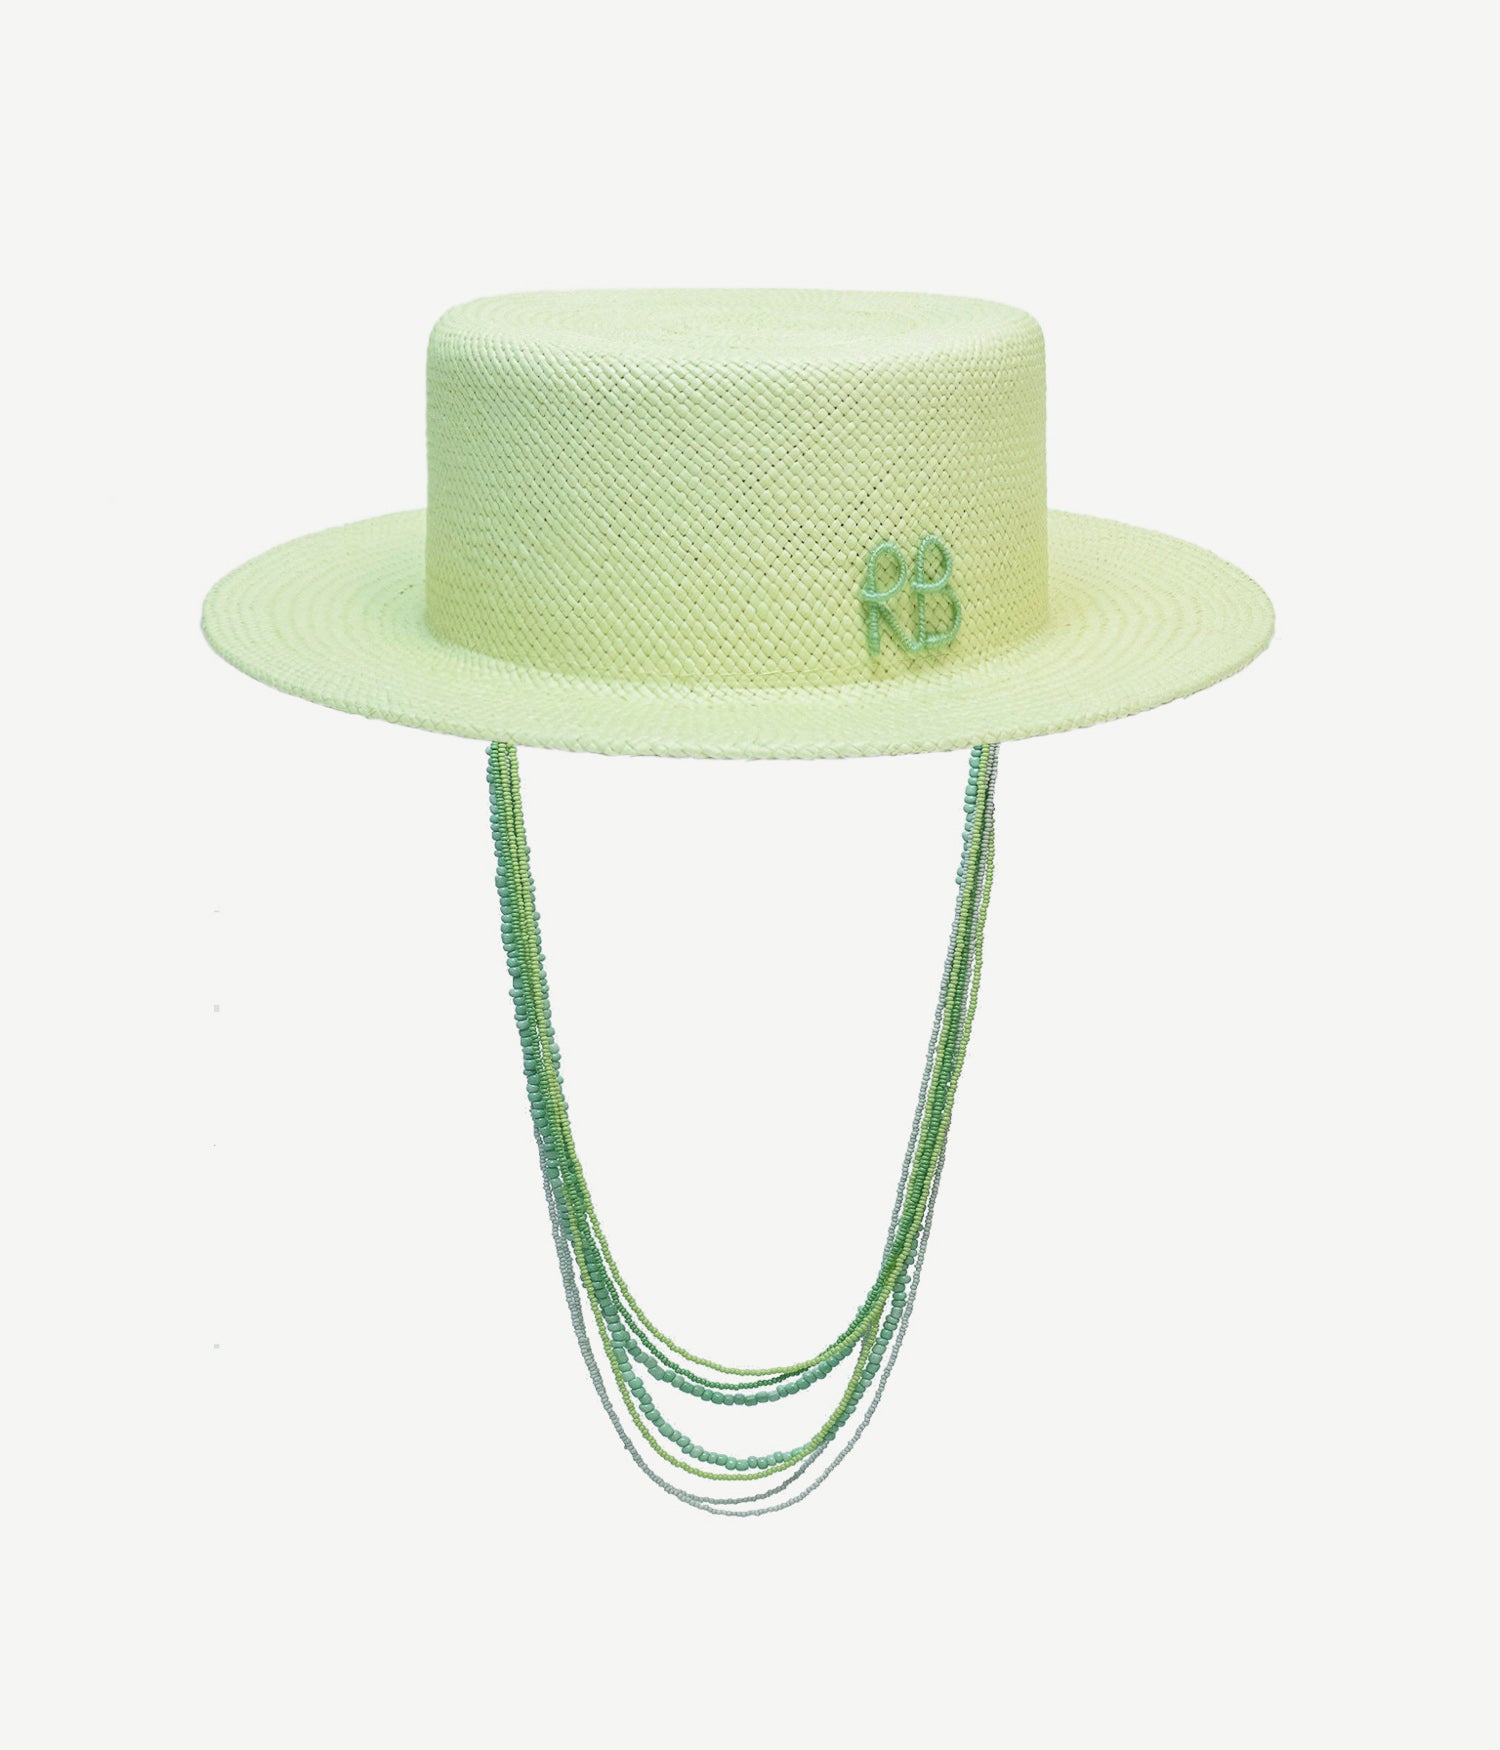 Beaded Chain Boater Hat